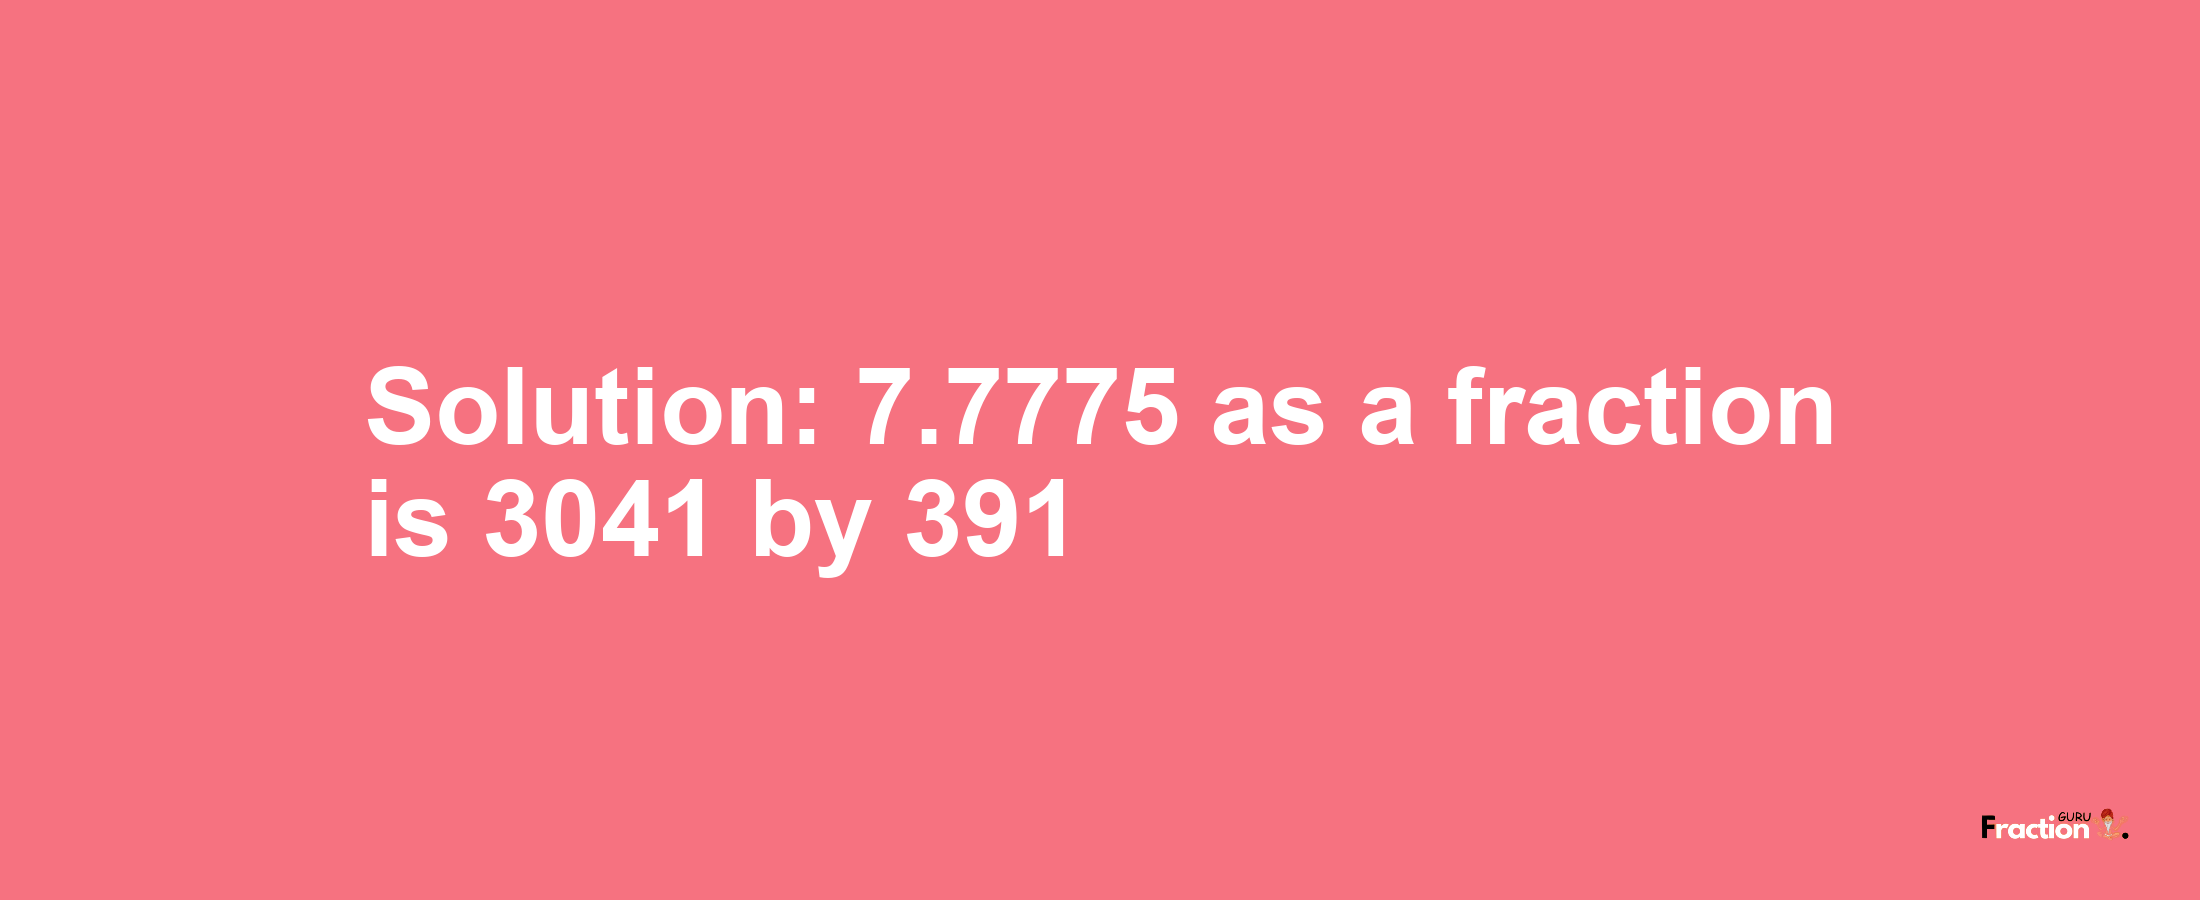 Solution:7.7775 as a fraction is 3041/391